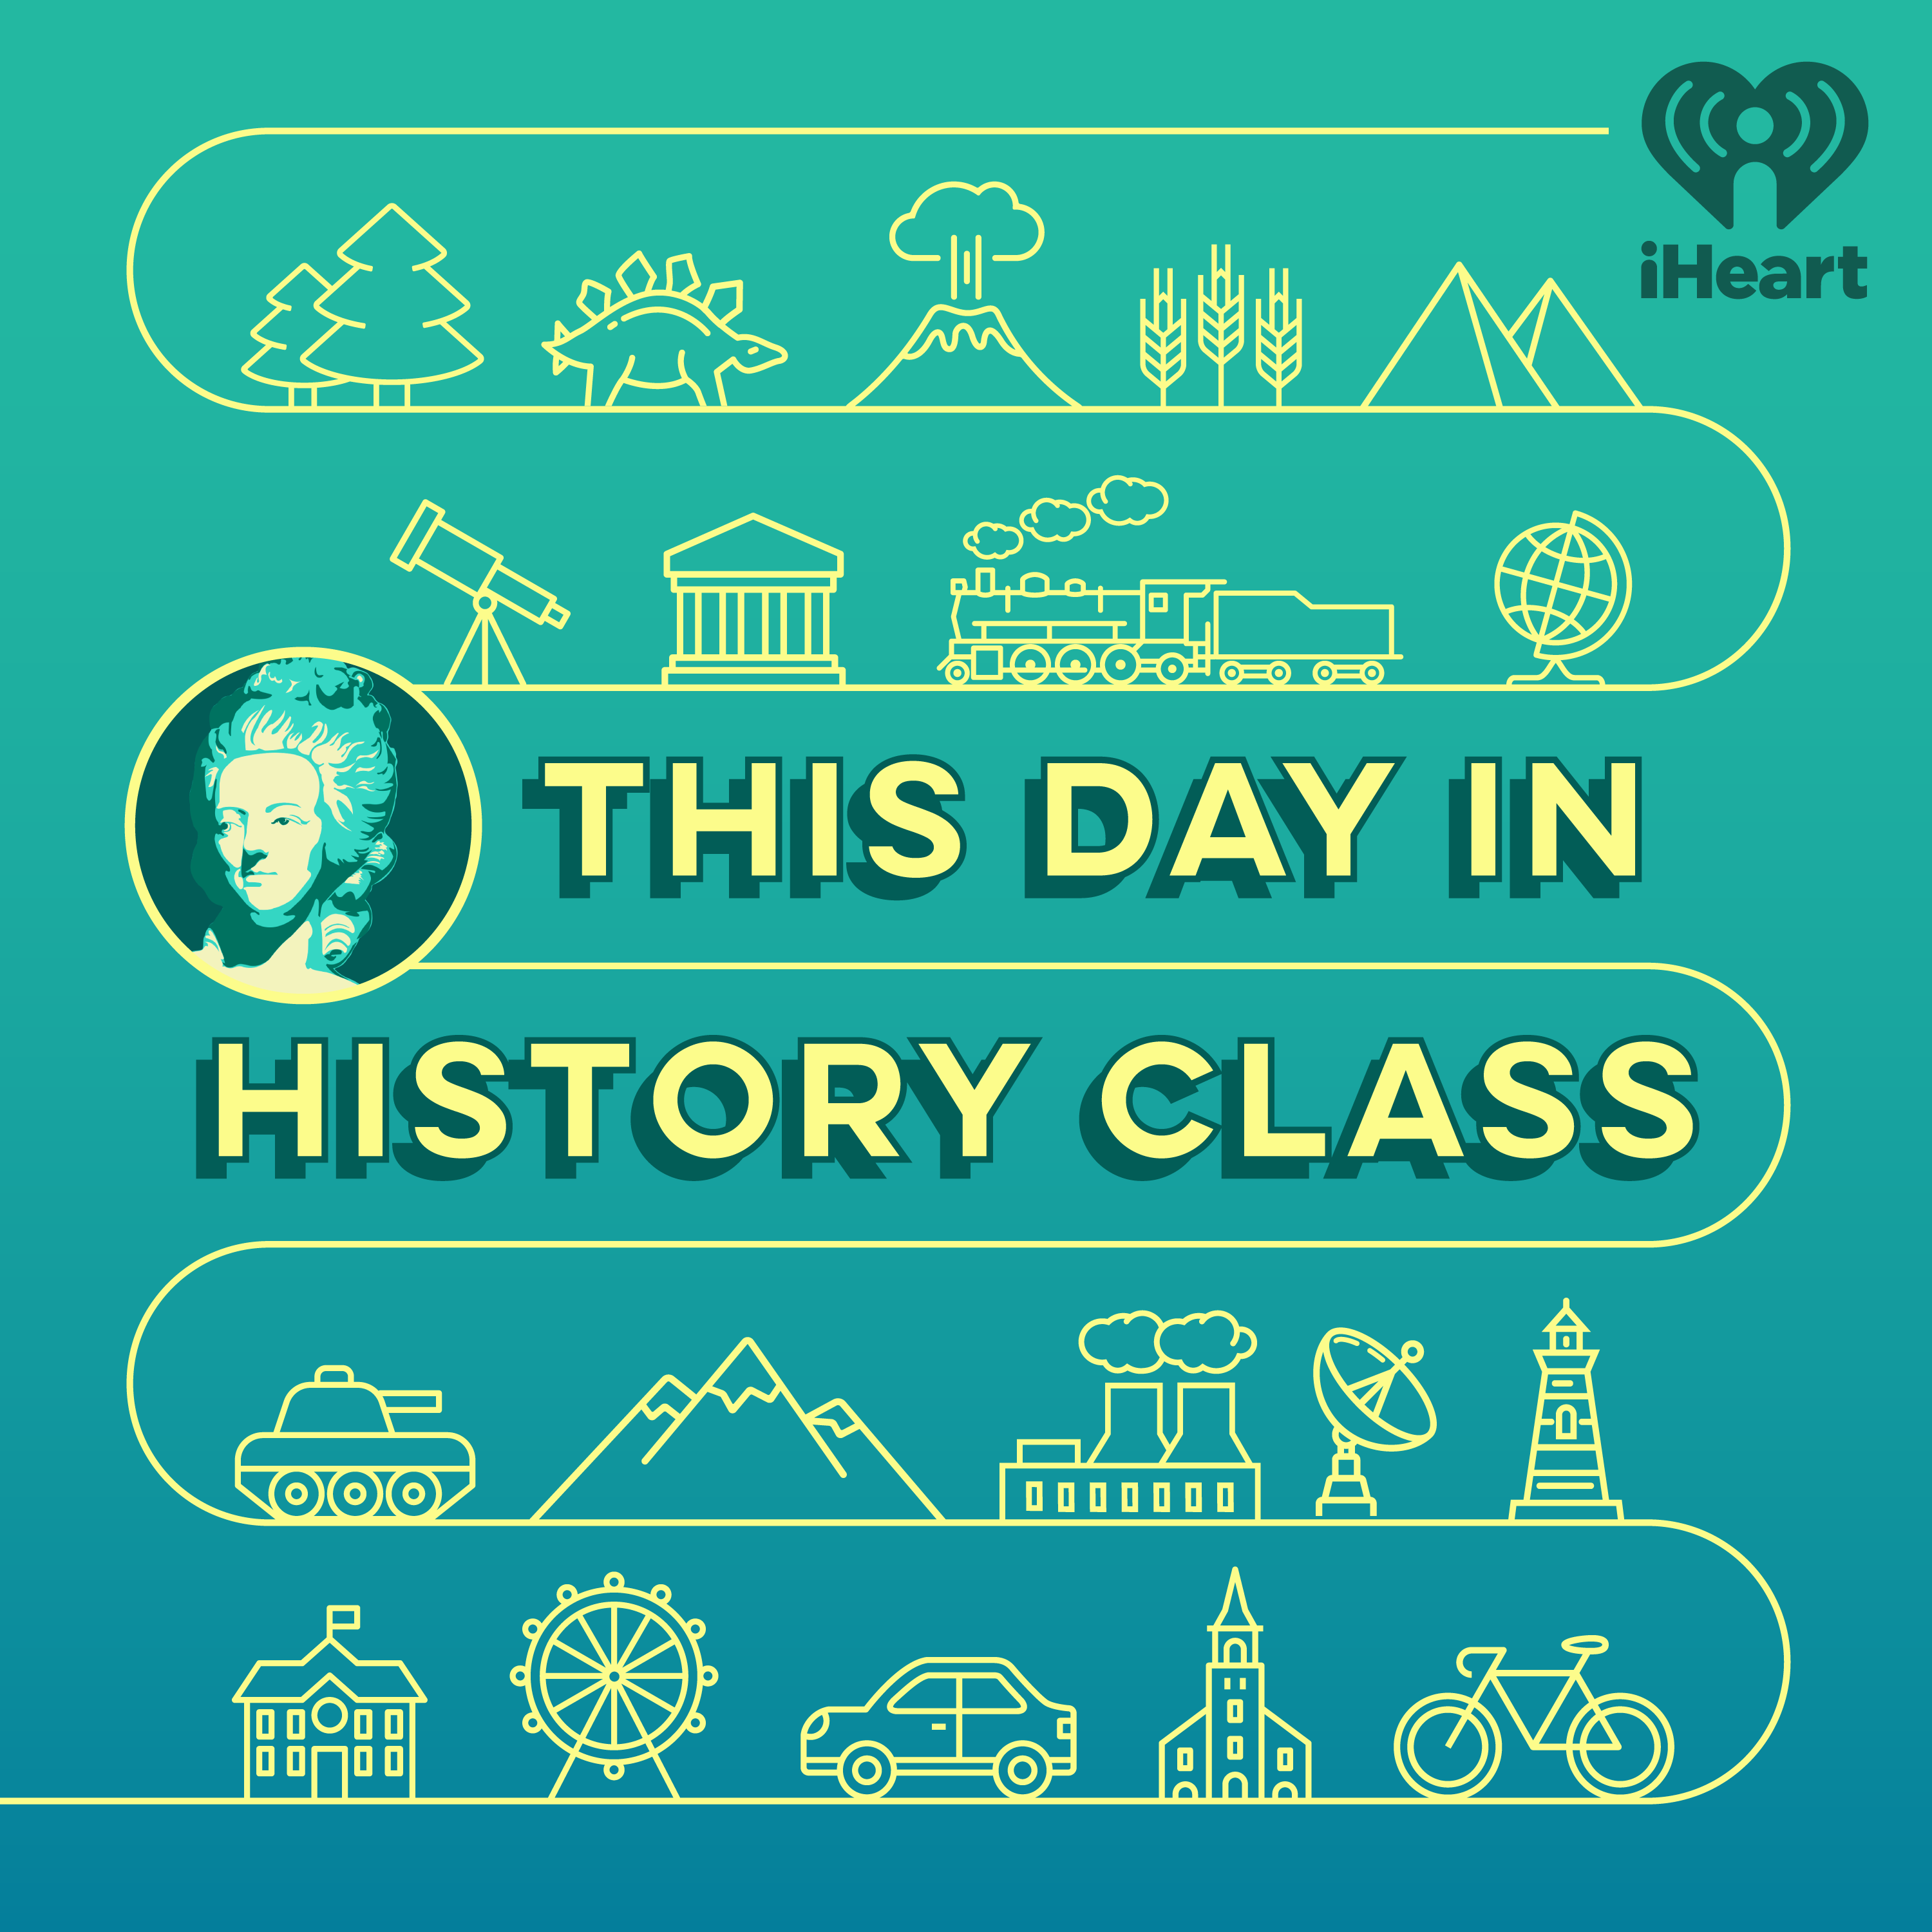 This Day In History Class - December 20th